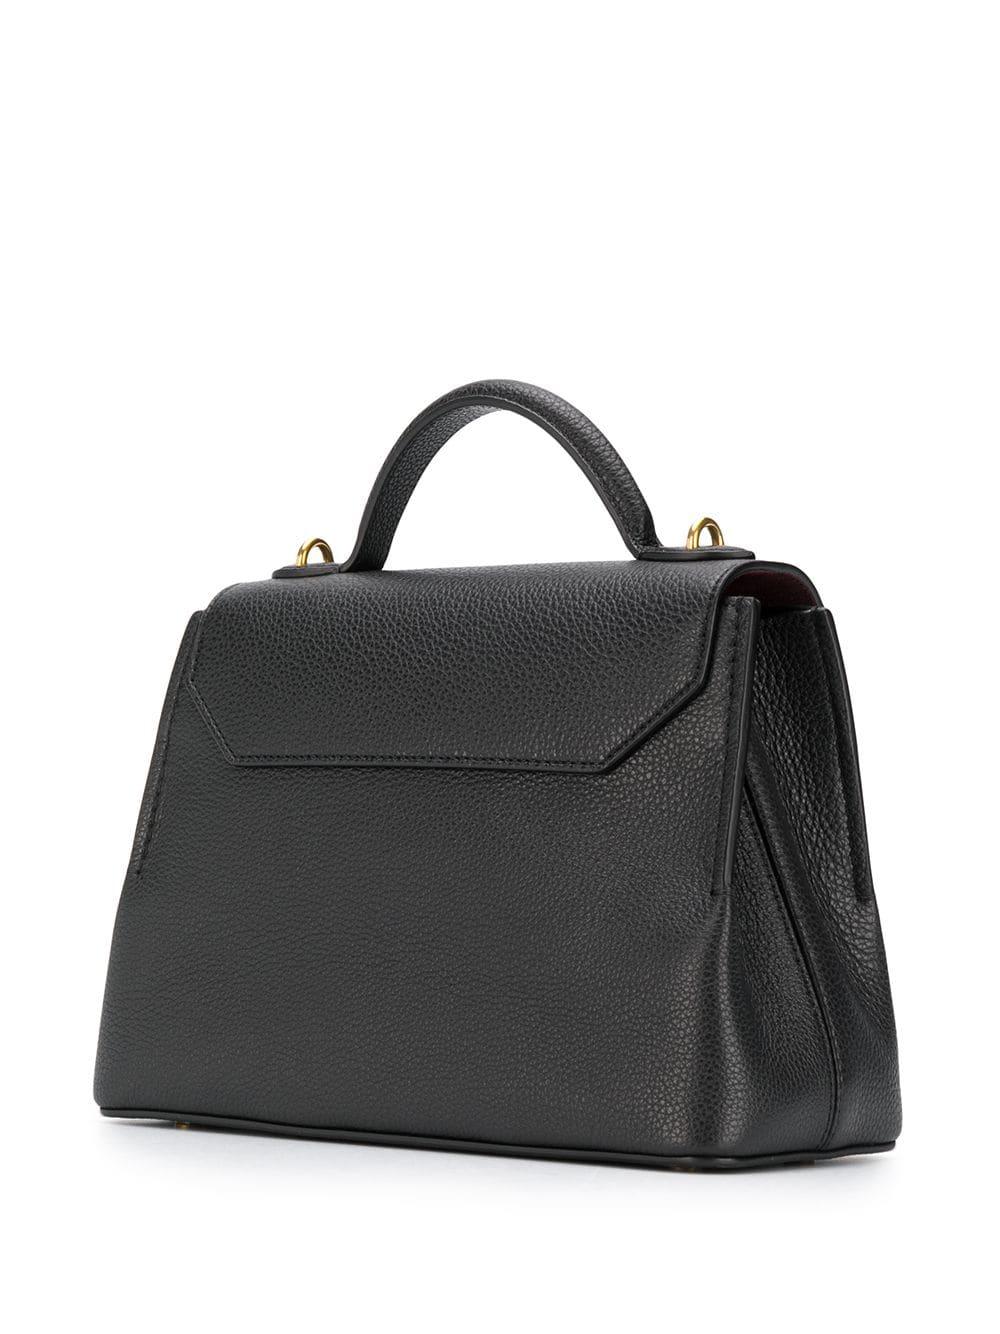 Mulberry Small Seaton Tote Bag in Black - Lyst